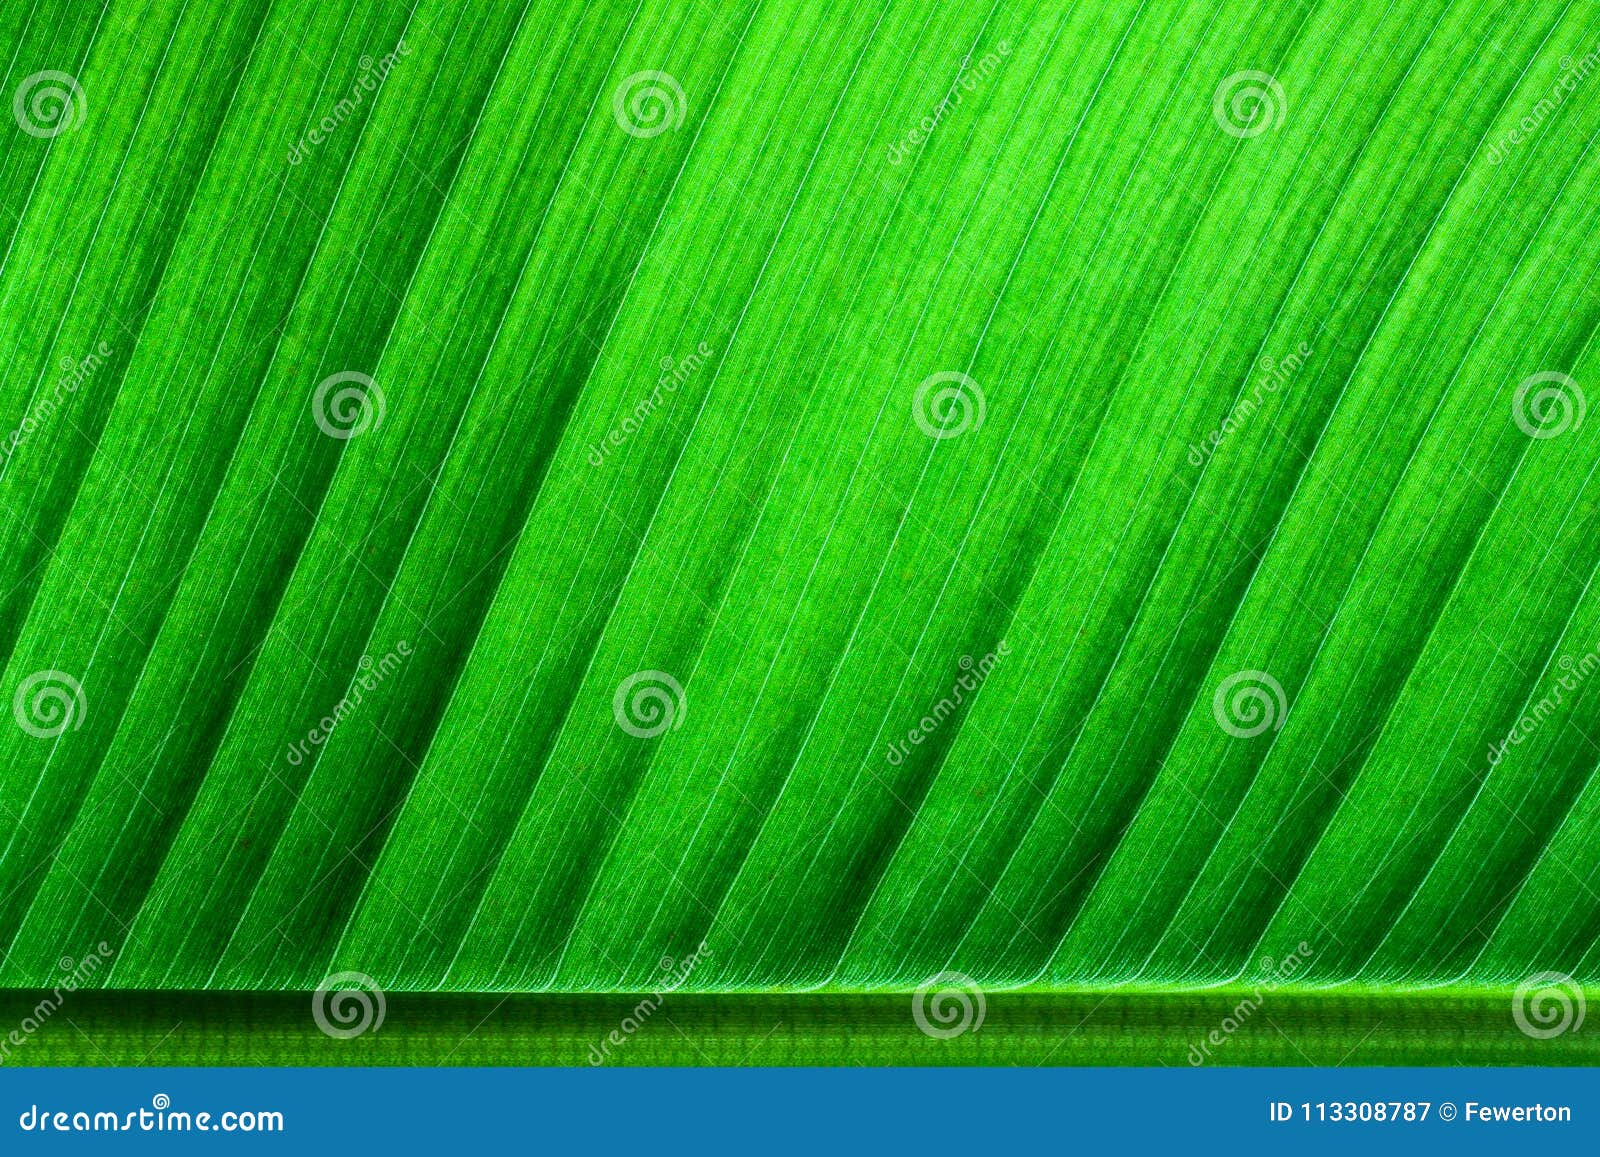 fresh green banana leaf surface structure extreme macro closeup photo with midrib on the lower side of the frame